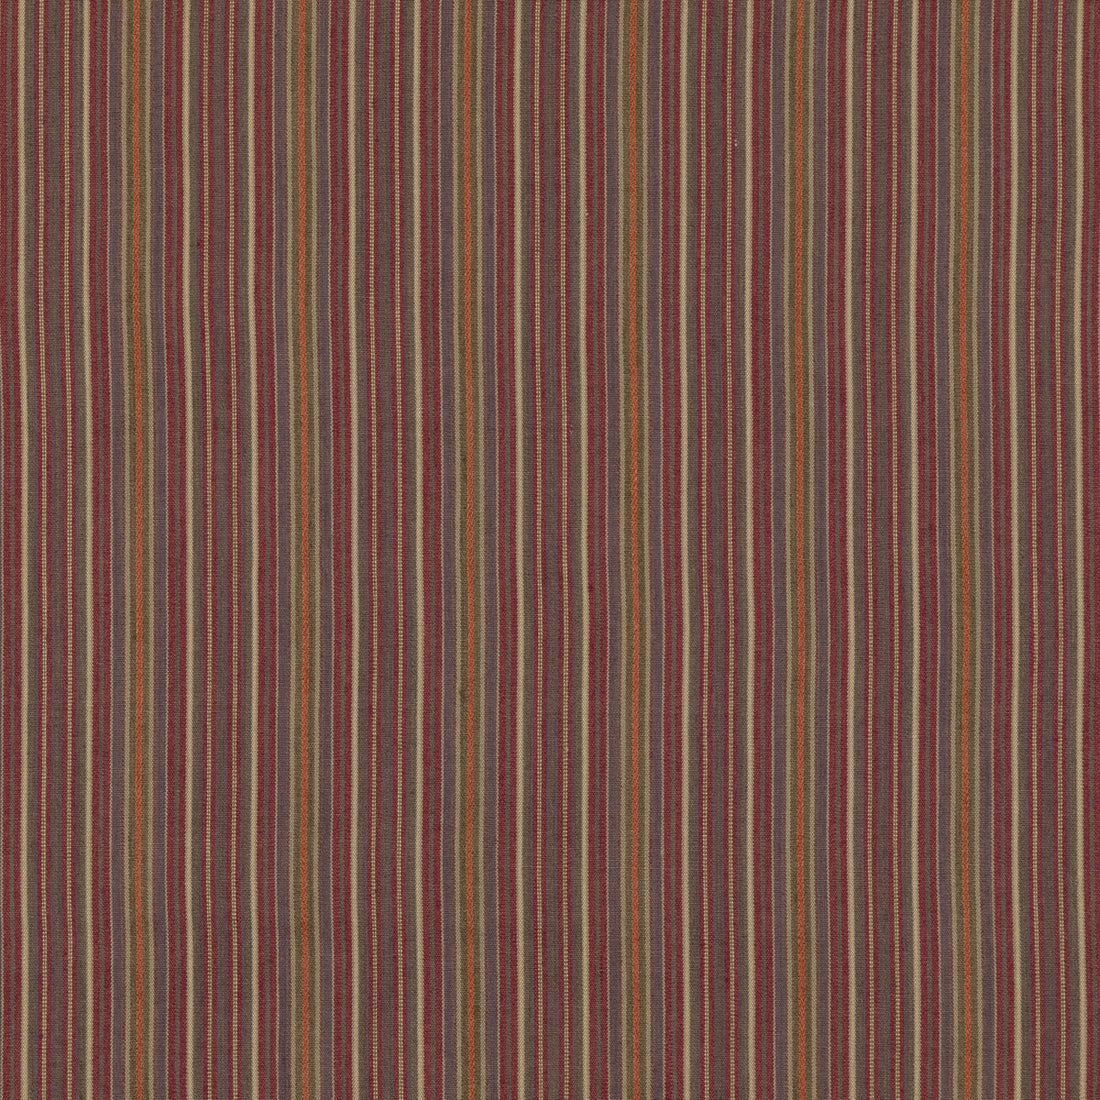 Falconer Stripe fabric in plum color - pattern FD789.H113.0 - by Mulberry in the Mulberry Stripes II collection